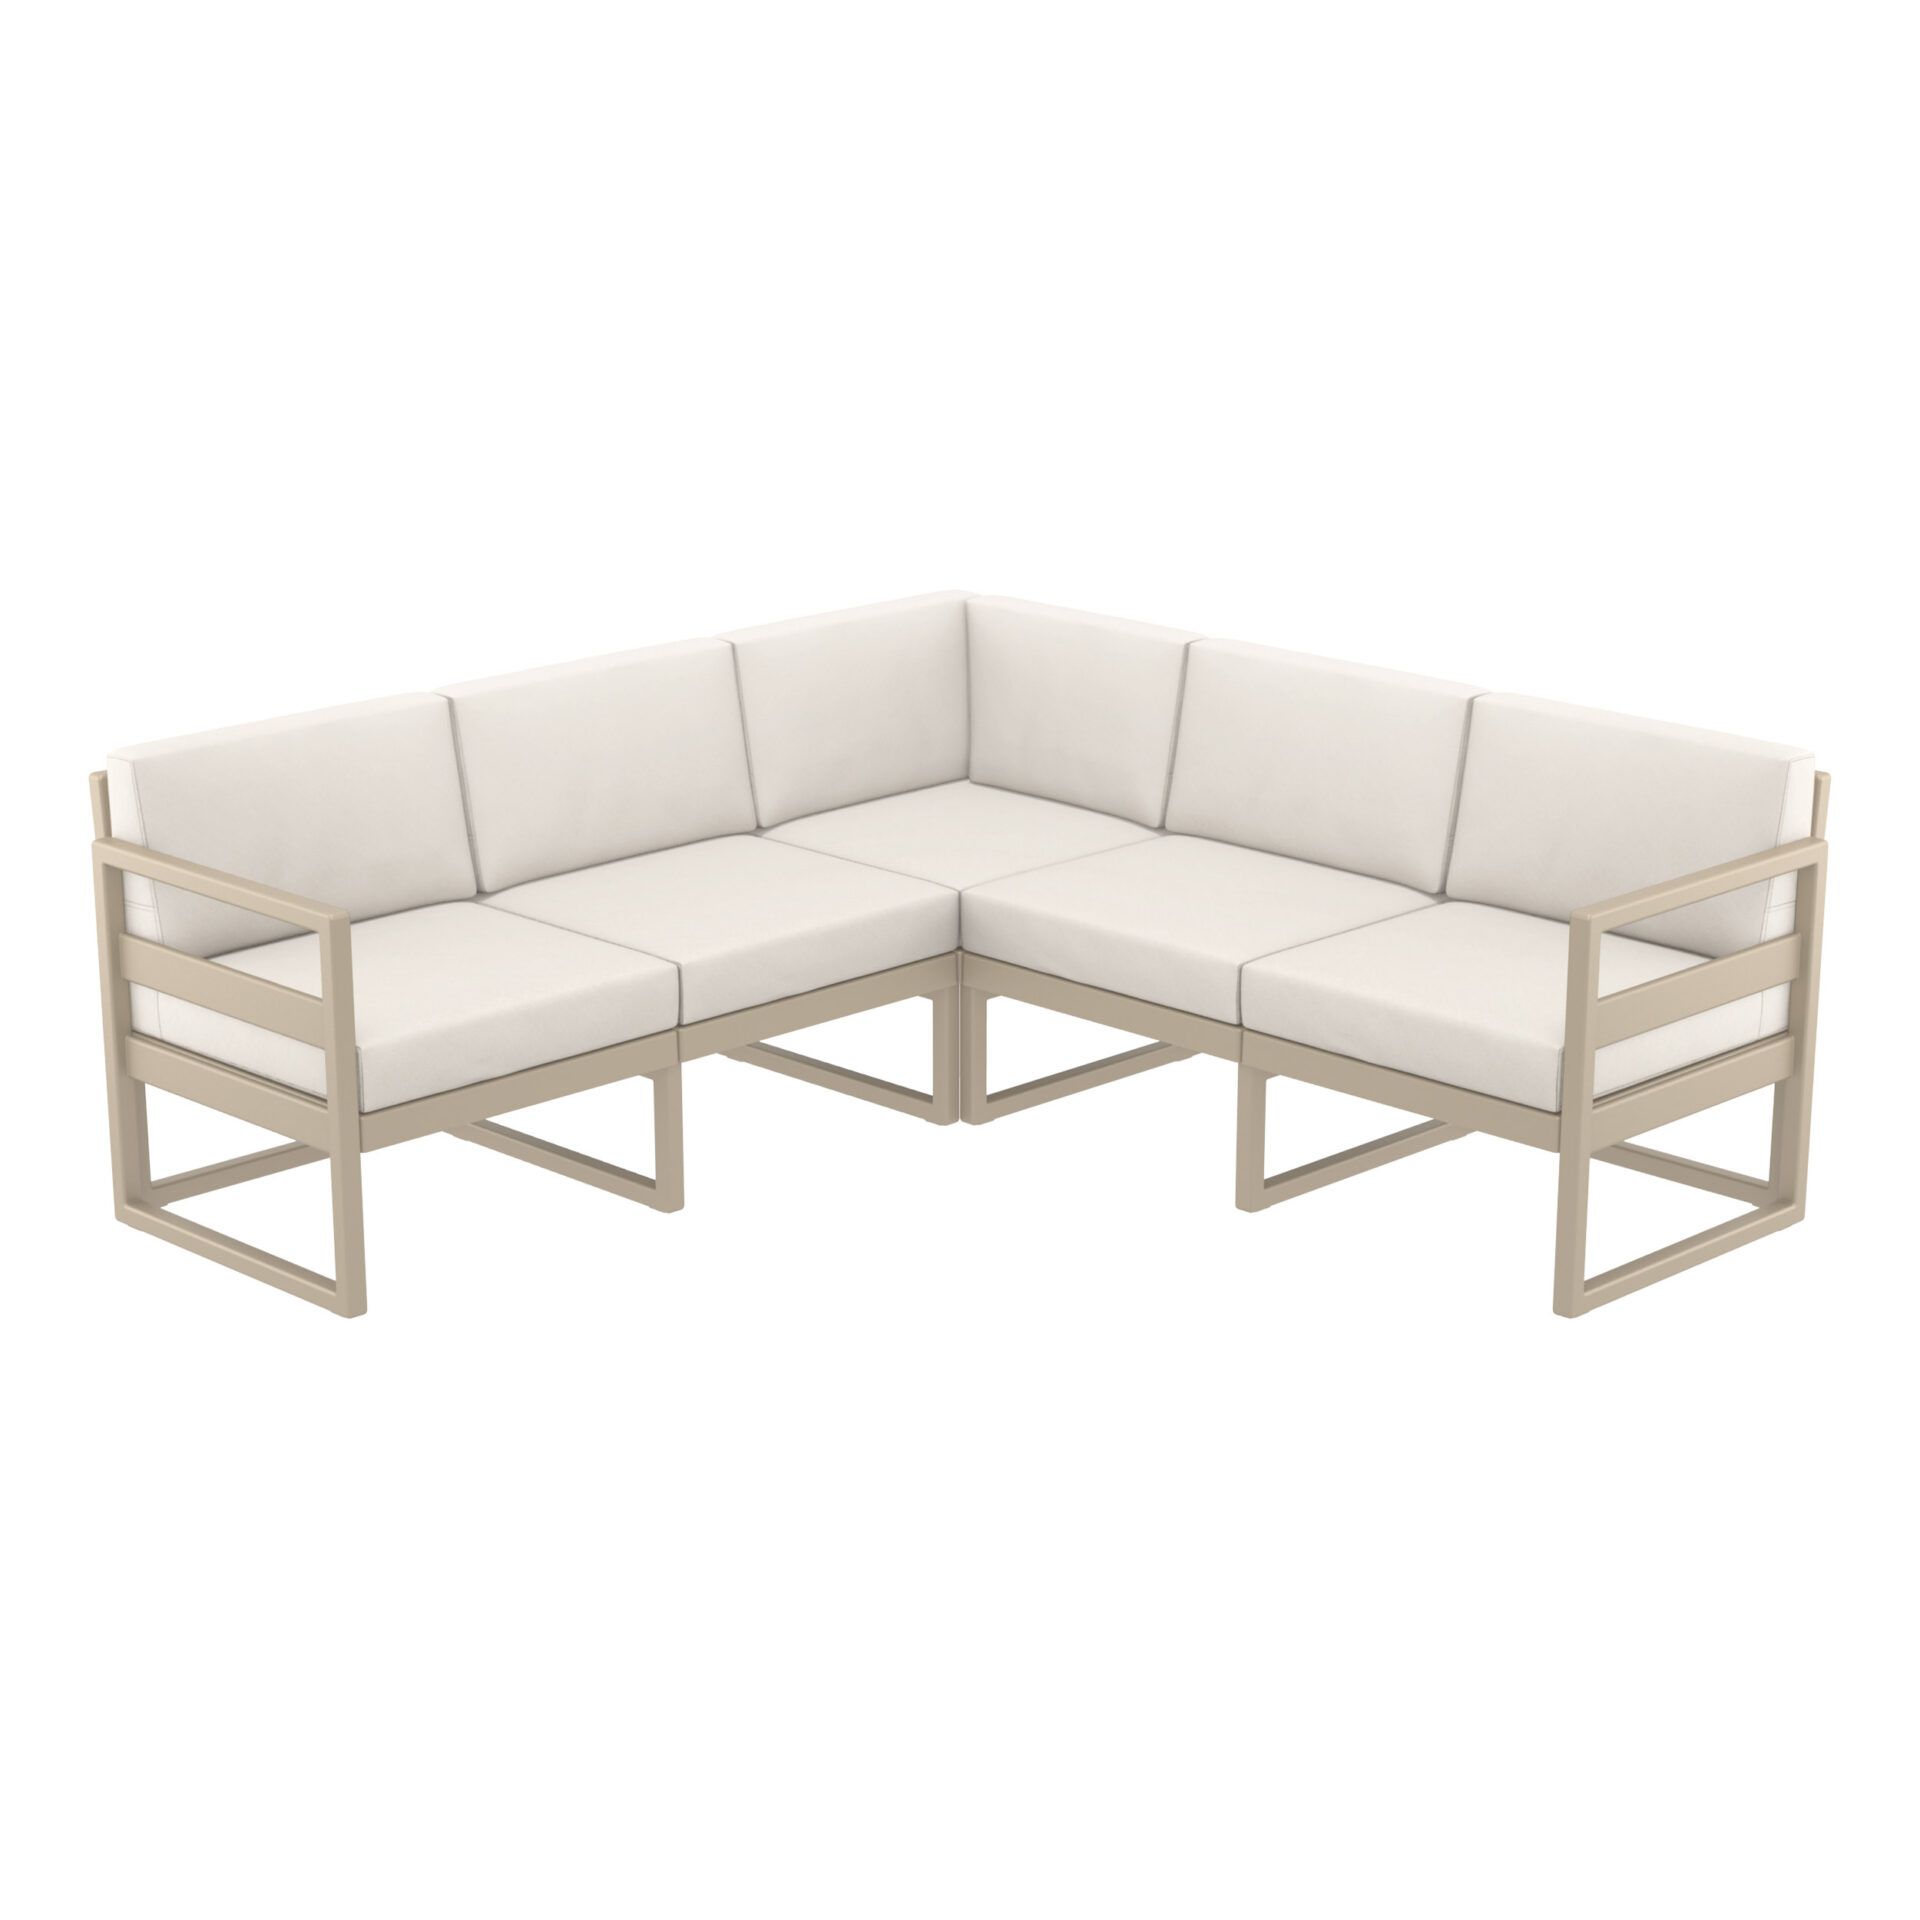 Mykonos Lounge Corner - Taupe with Beige Cushions